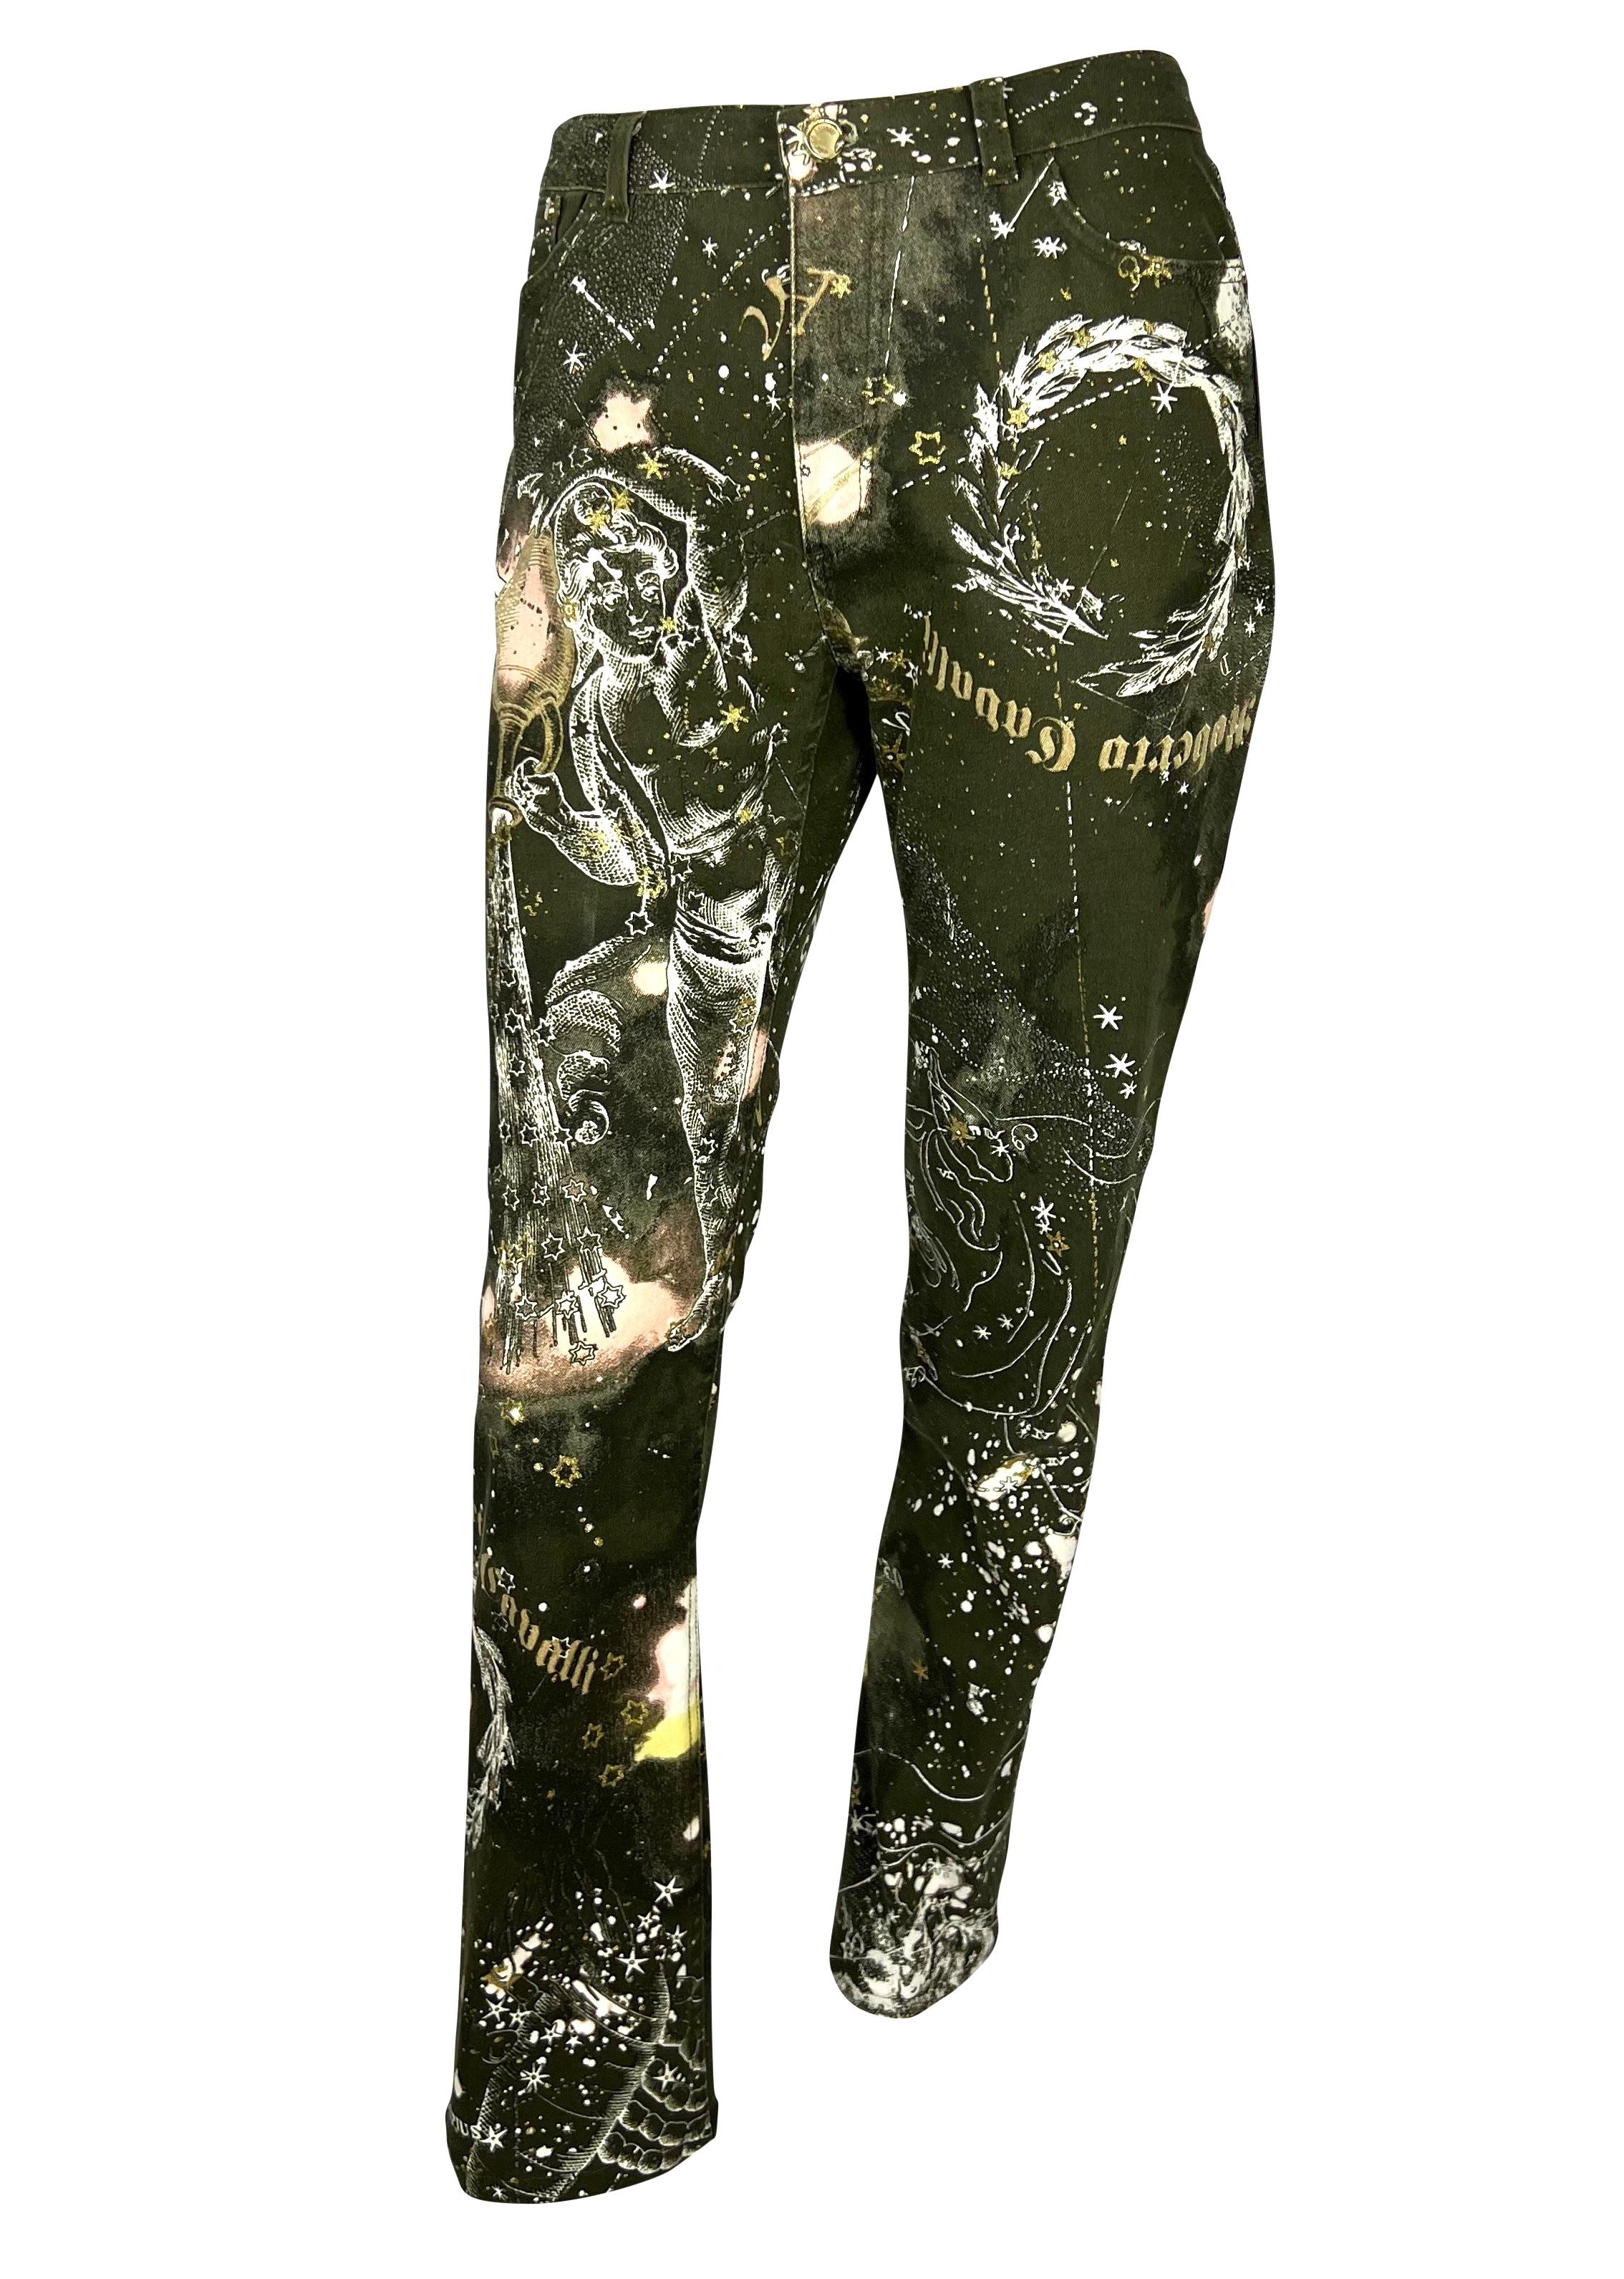 Presenting a pair of stunning astrology print jeans, designed by Roberto Cavalli. From 2003, this sought-after print features constellations, horoscope signs, and glittery metallic logos throughout. Check out our storefront for more Y2K Roberto